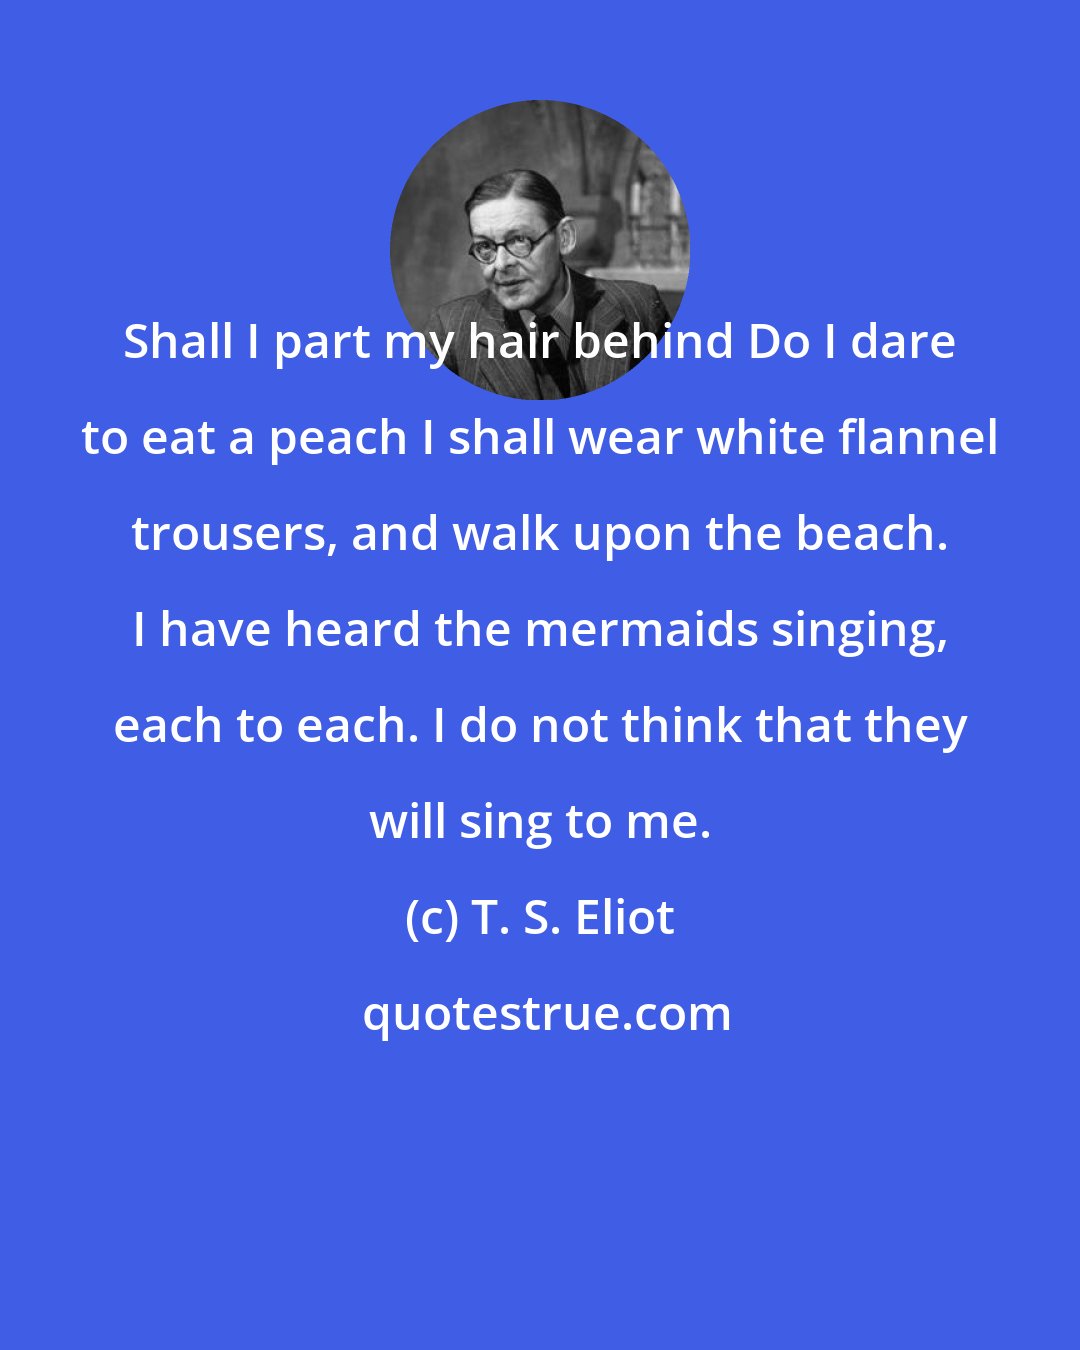 T. S. Eliot: Shall I part my hair behind Do I dare to eat a peach I shall wear white flannel trousers, and walk upon the beach. I have heard the mermaids singing, each to each. I do not think that they will sing to me.